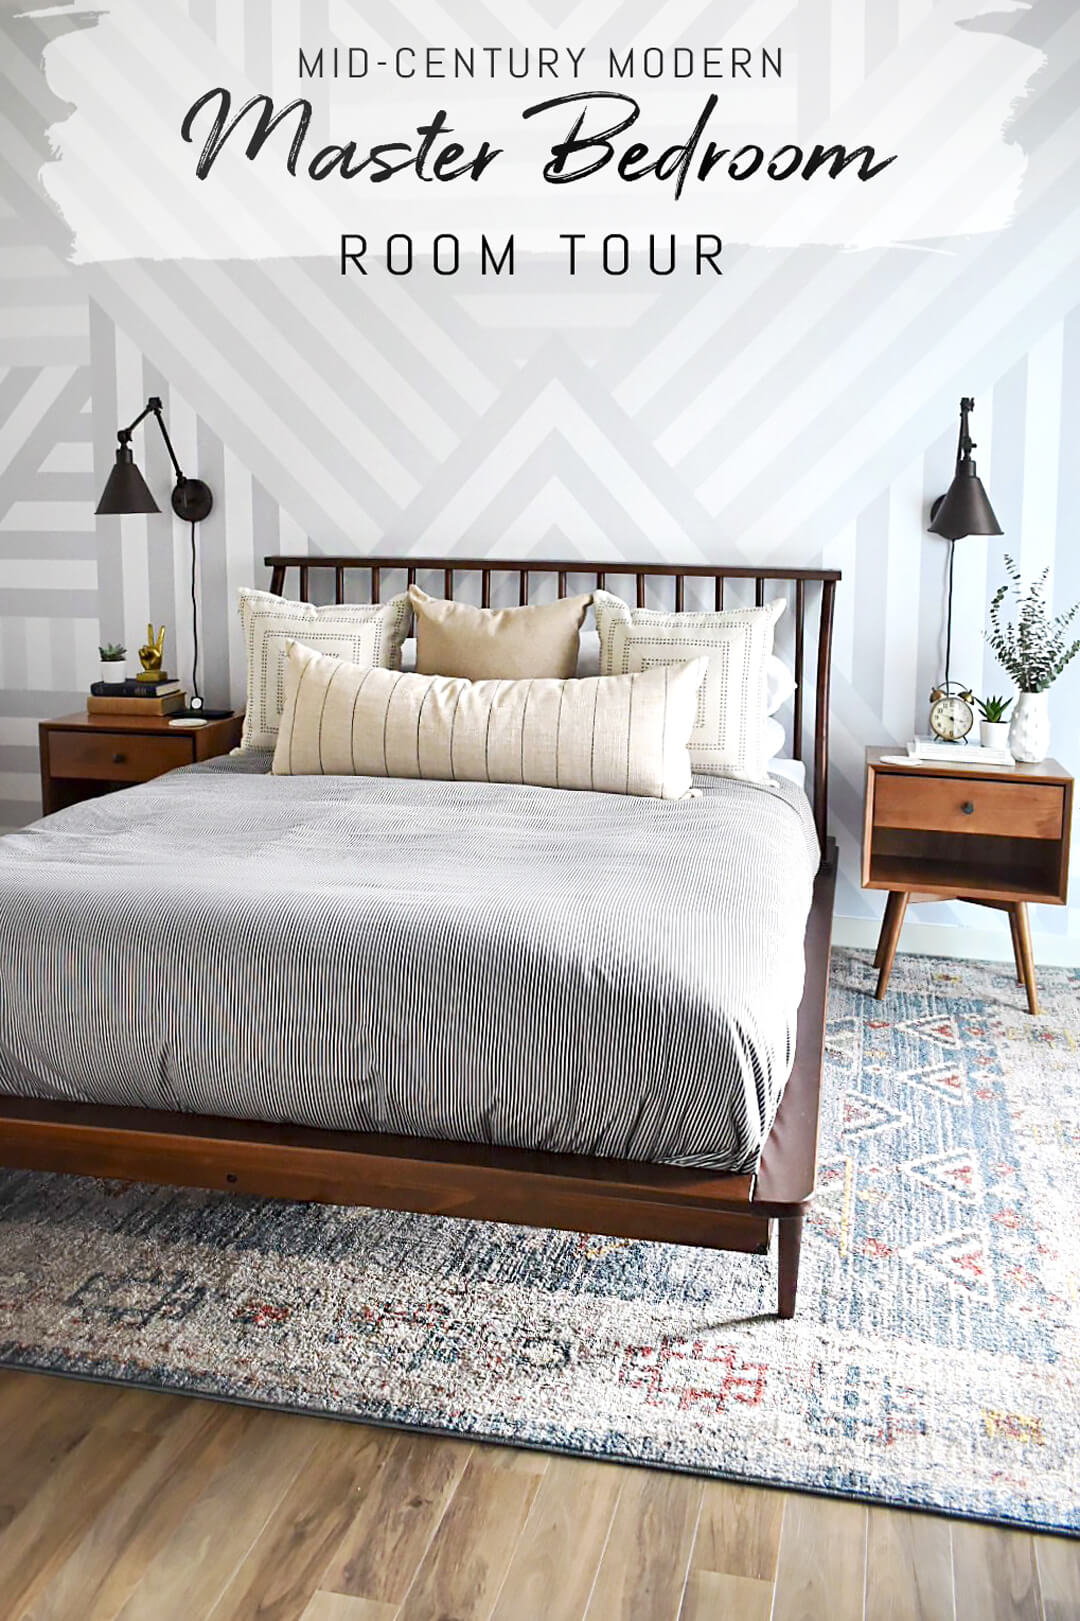 Mid century modern master bedroom interior room tour with oversized geometric wallpaper, dark wood furniture, light color bed linen and mix of patterns